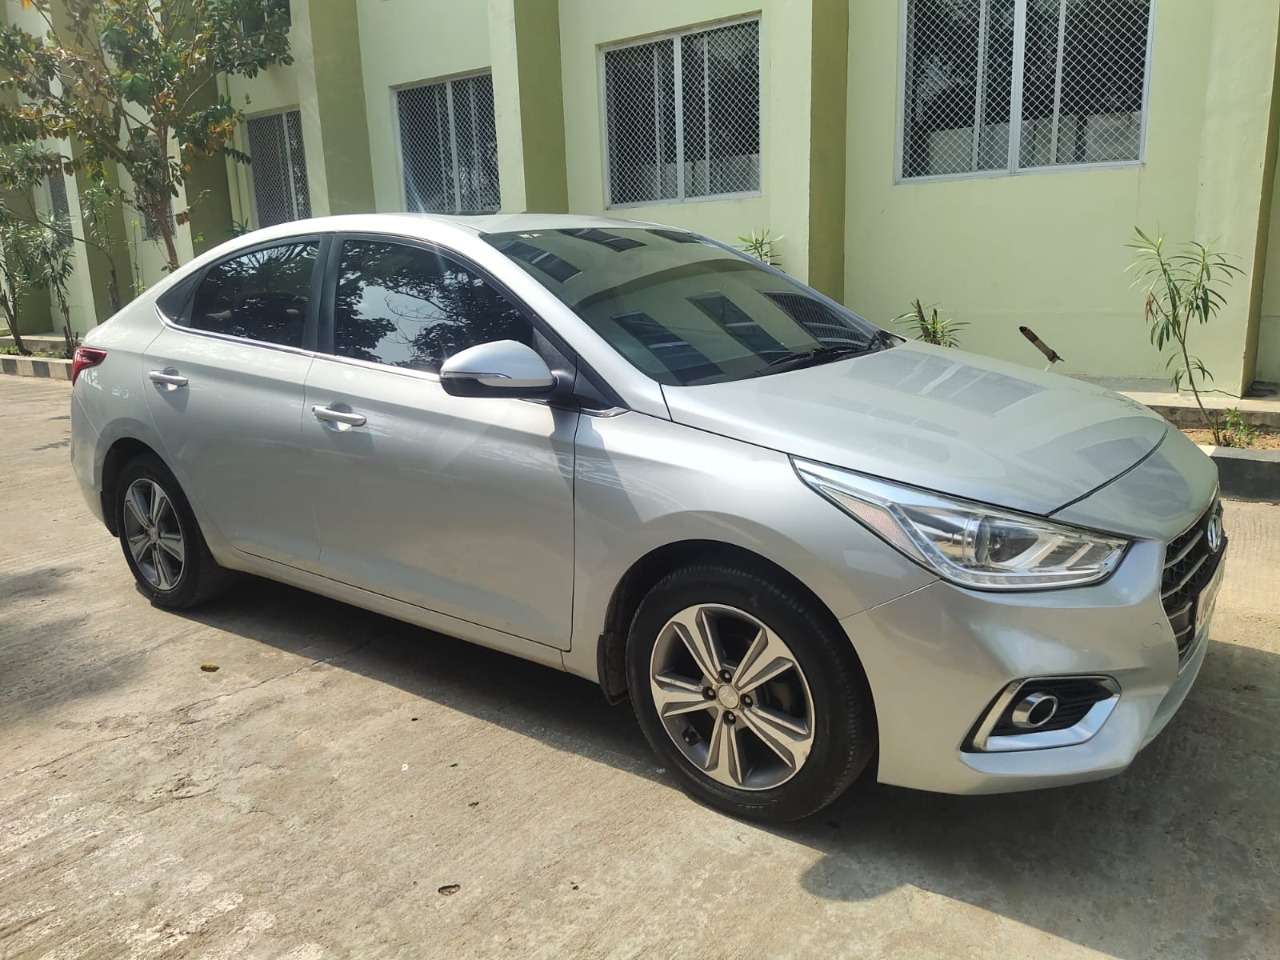 2454-for-sale-Hyundai-Verna-Diesel-First-Owner-2018-PY-registered-rs-930000